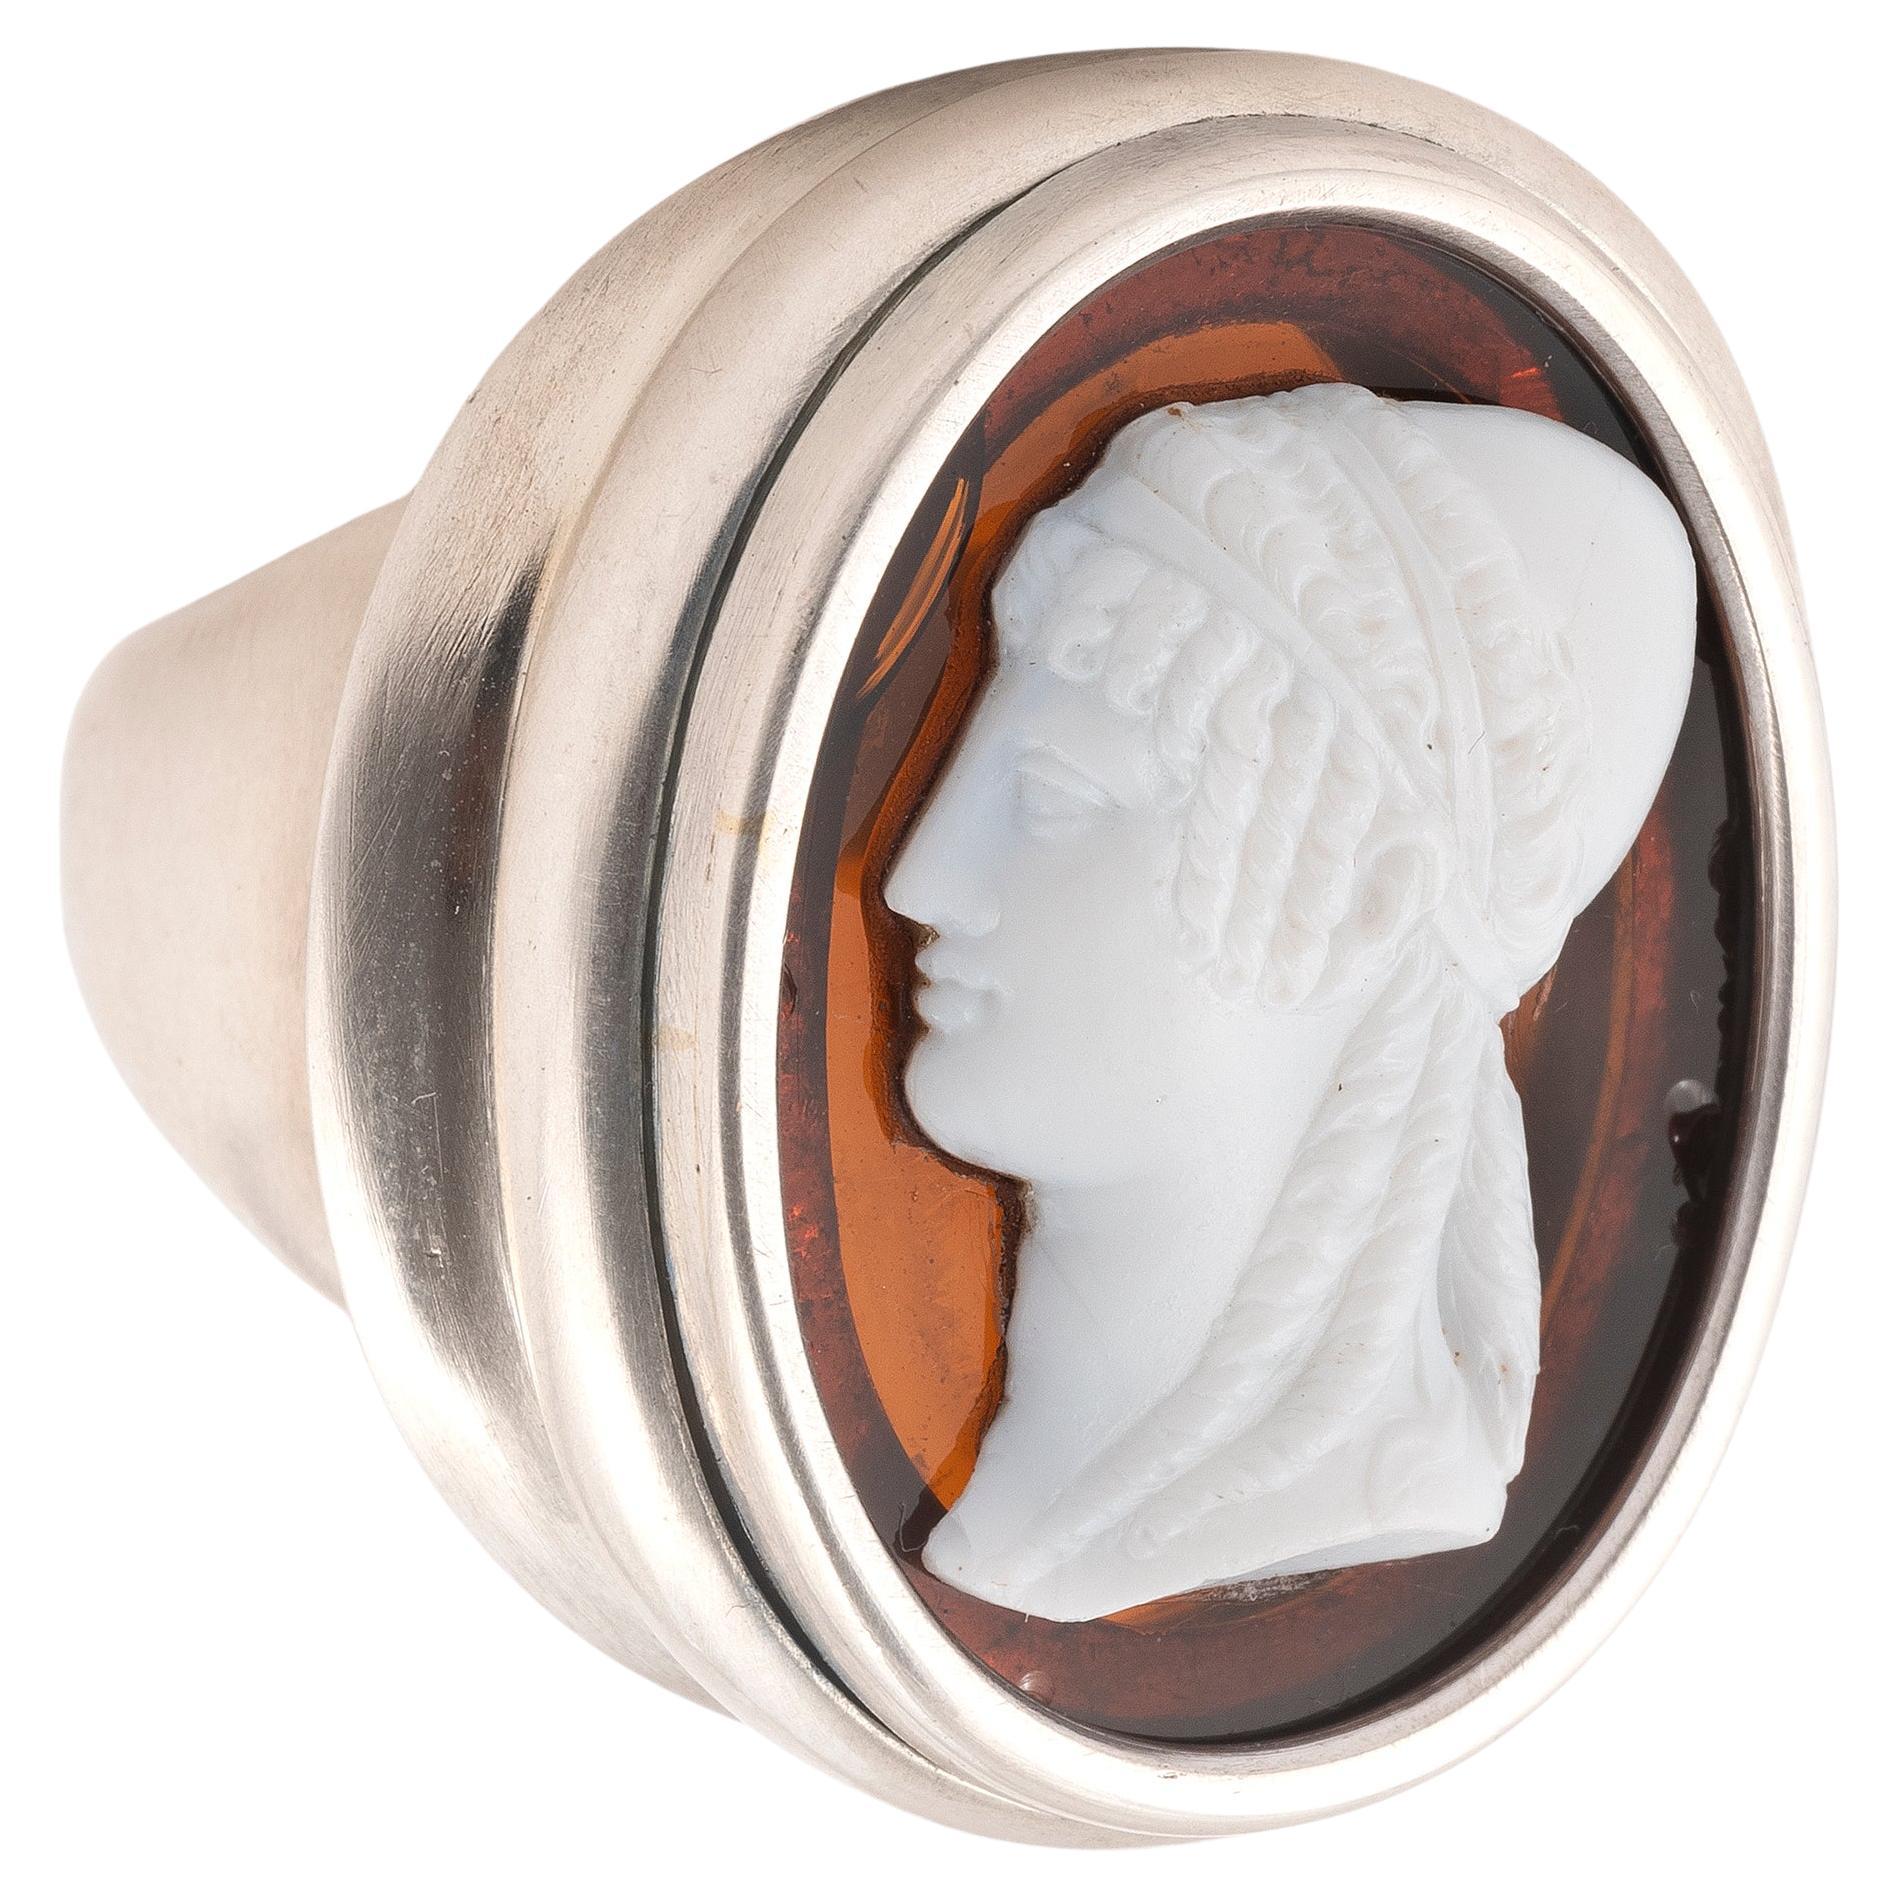 French cameo glass depicting woman in profile setting in silver.
Top size 31mm x 23mm
Size : 9
Weight: 34.22gr.